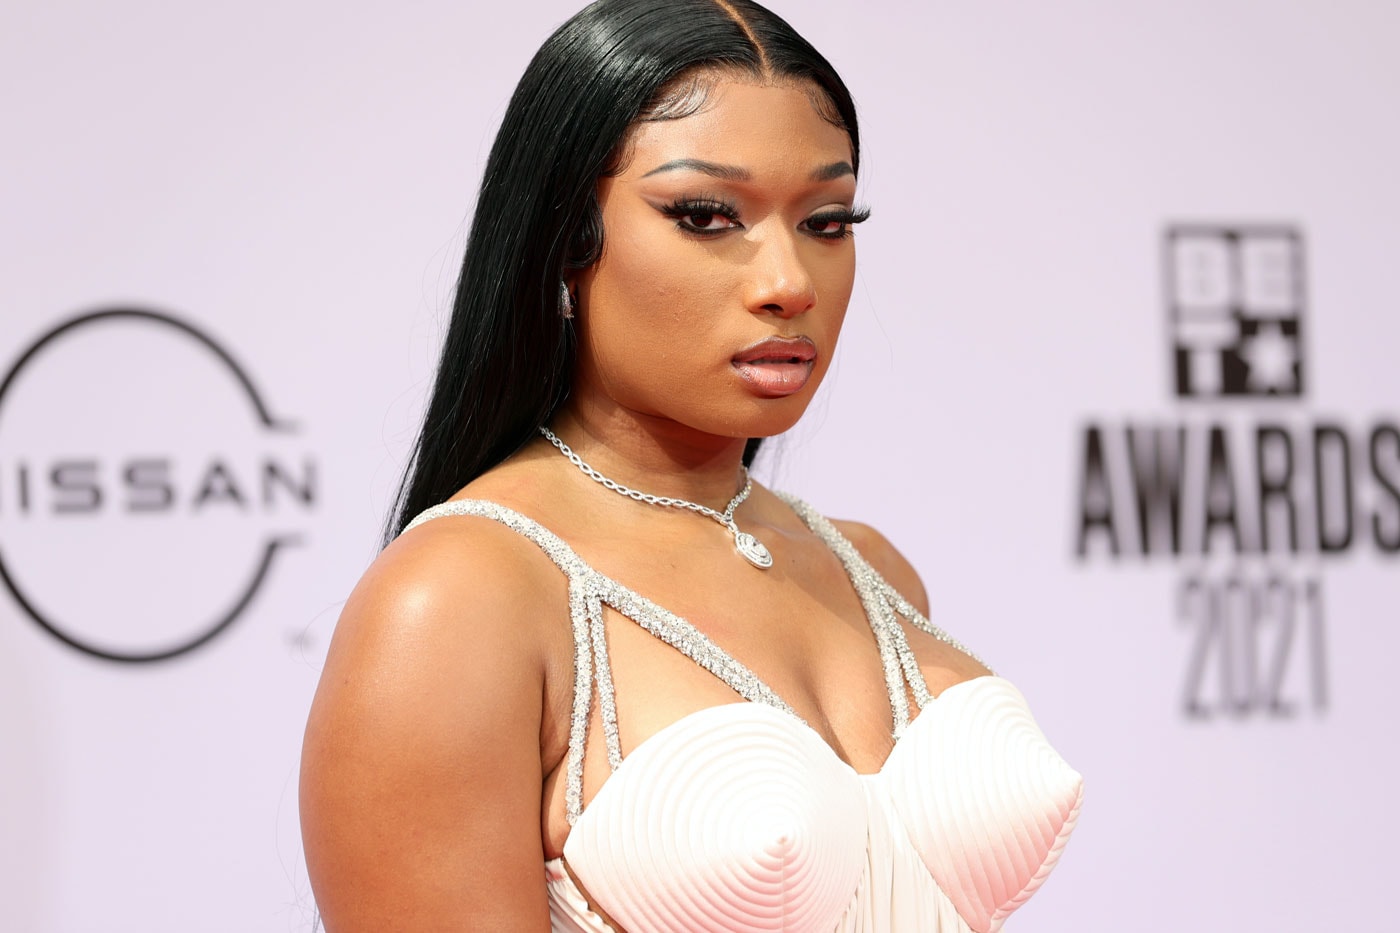 Megan Thee Stallion 1501 certified entertainment Something for Thee Hotties lawsuit not counted as album